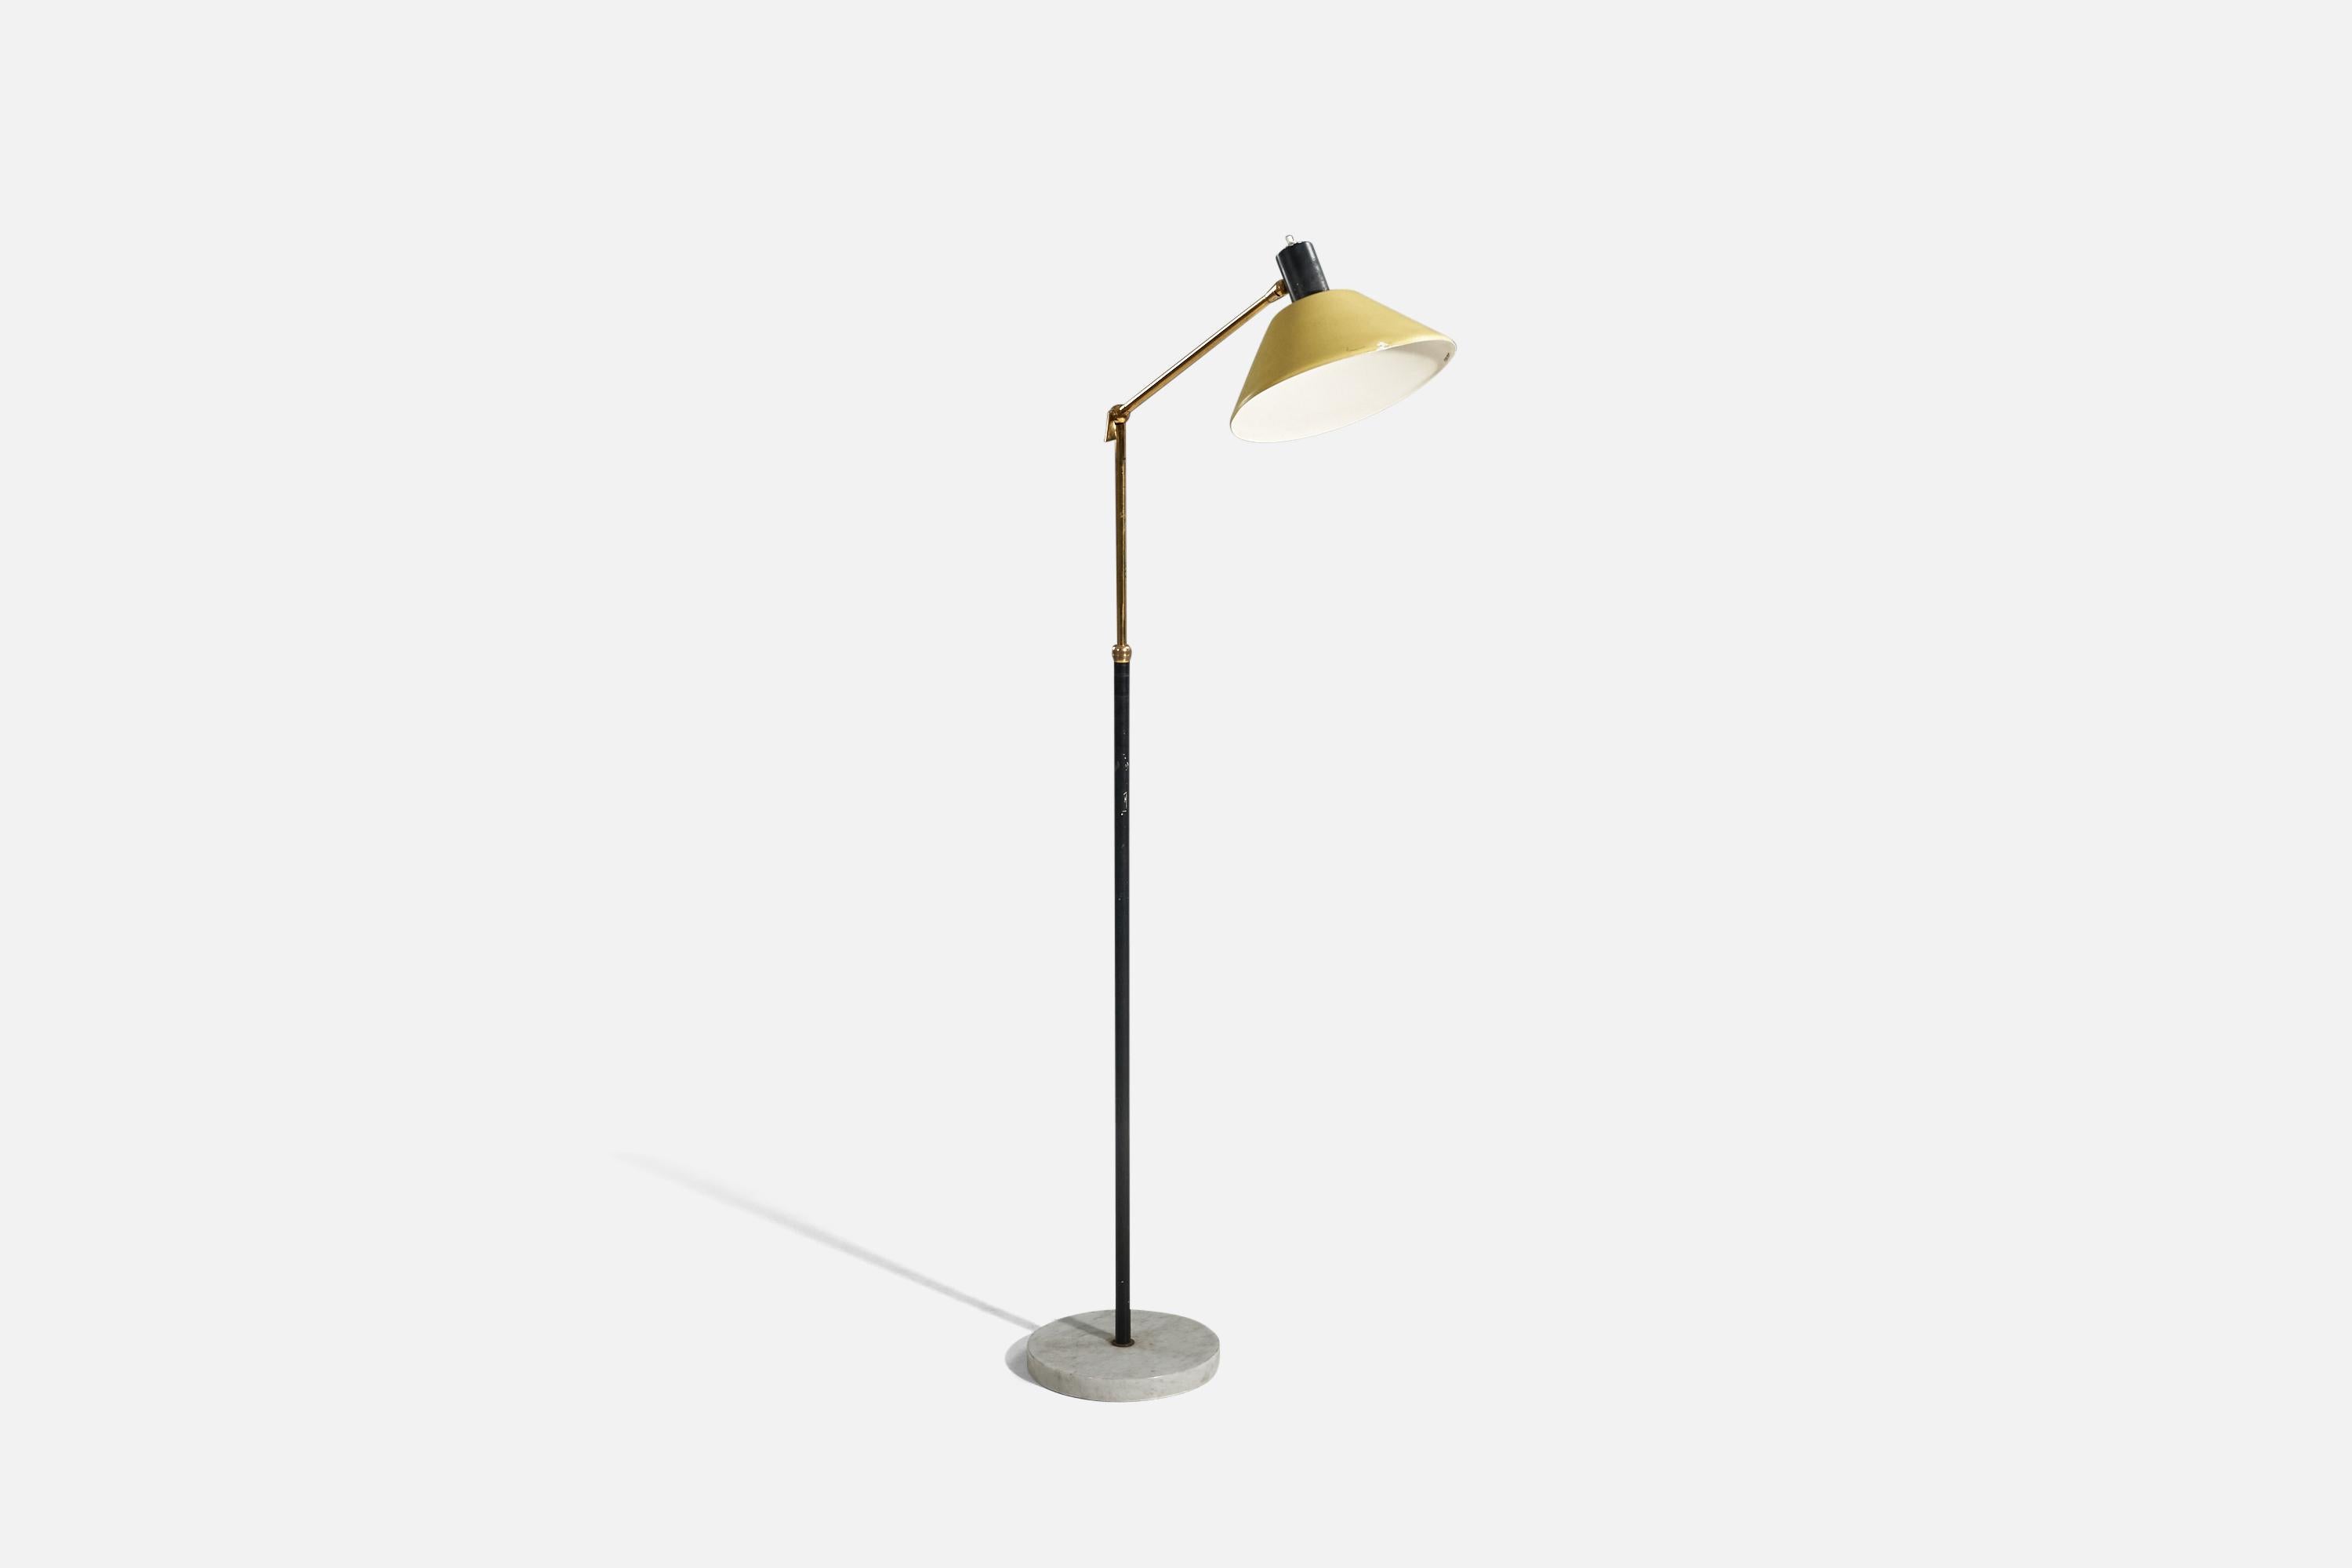 Stilux Milano, Adjustable Floor Lamp, Brass, Metal, Marble, Italy, 1950s In Good Condition For Sale In High Point, NC